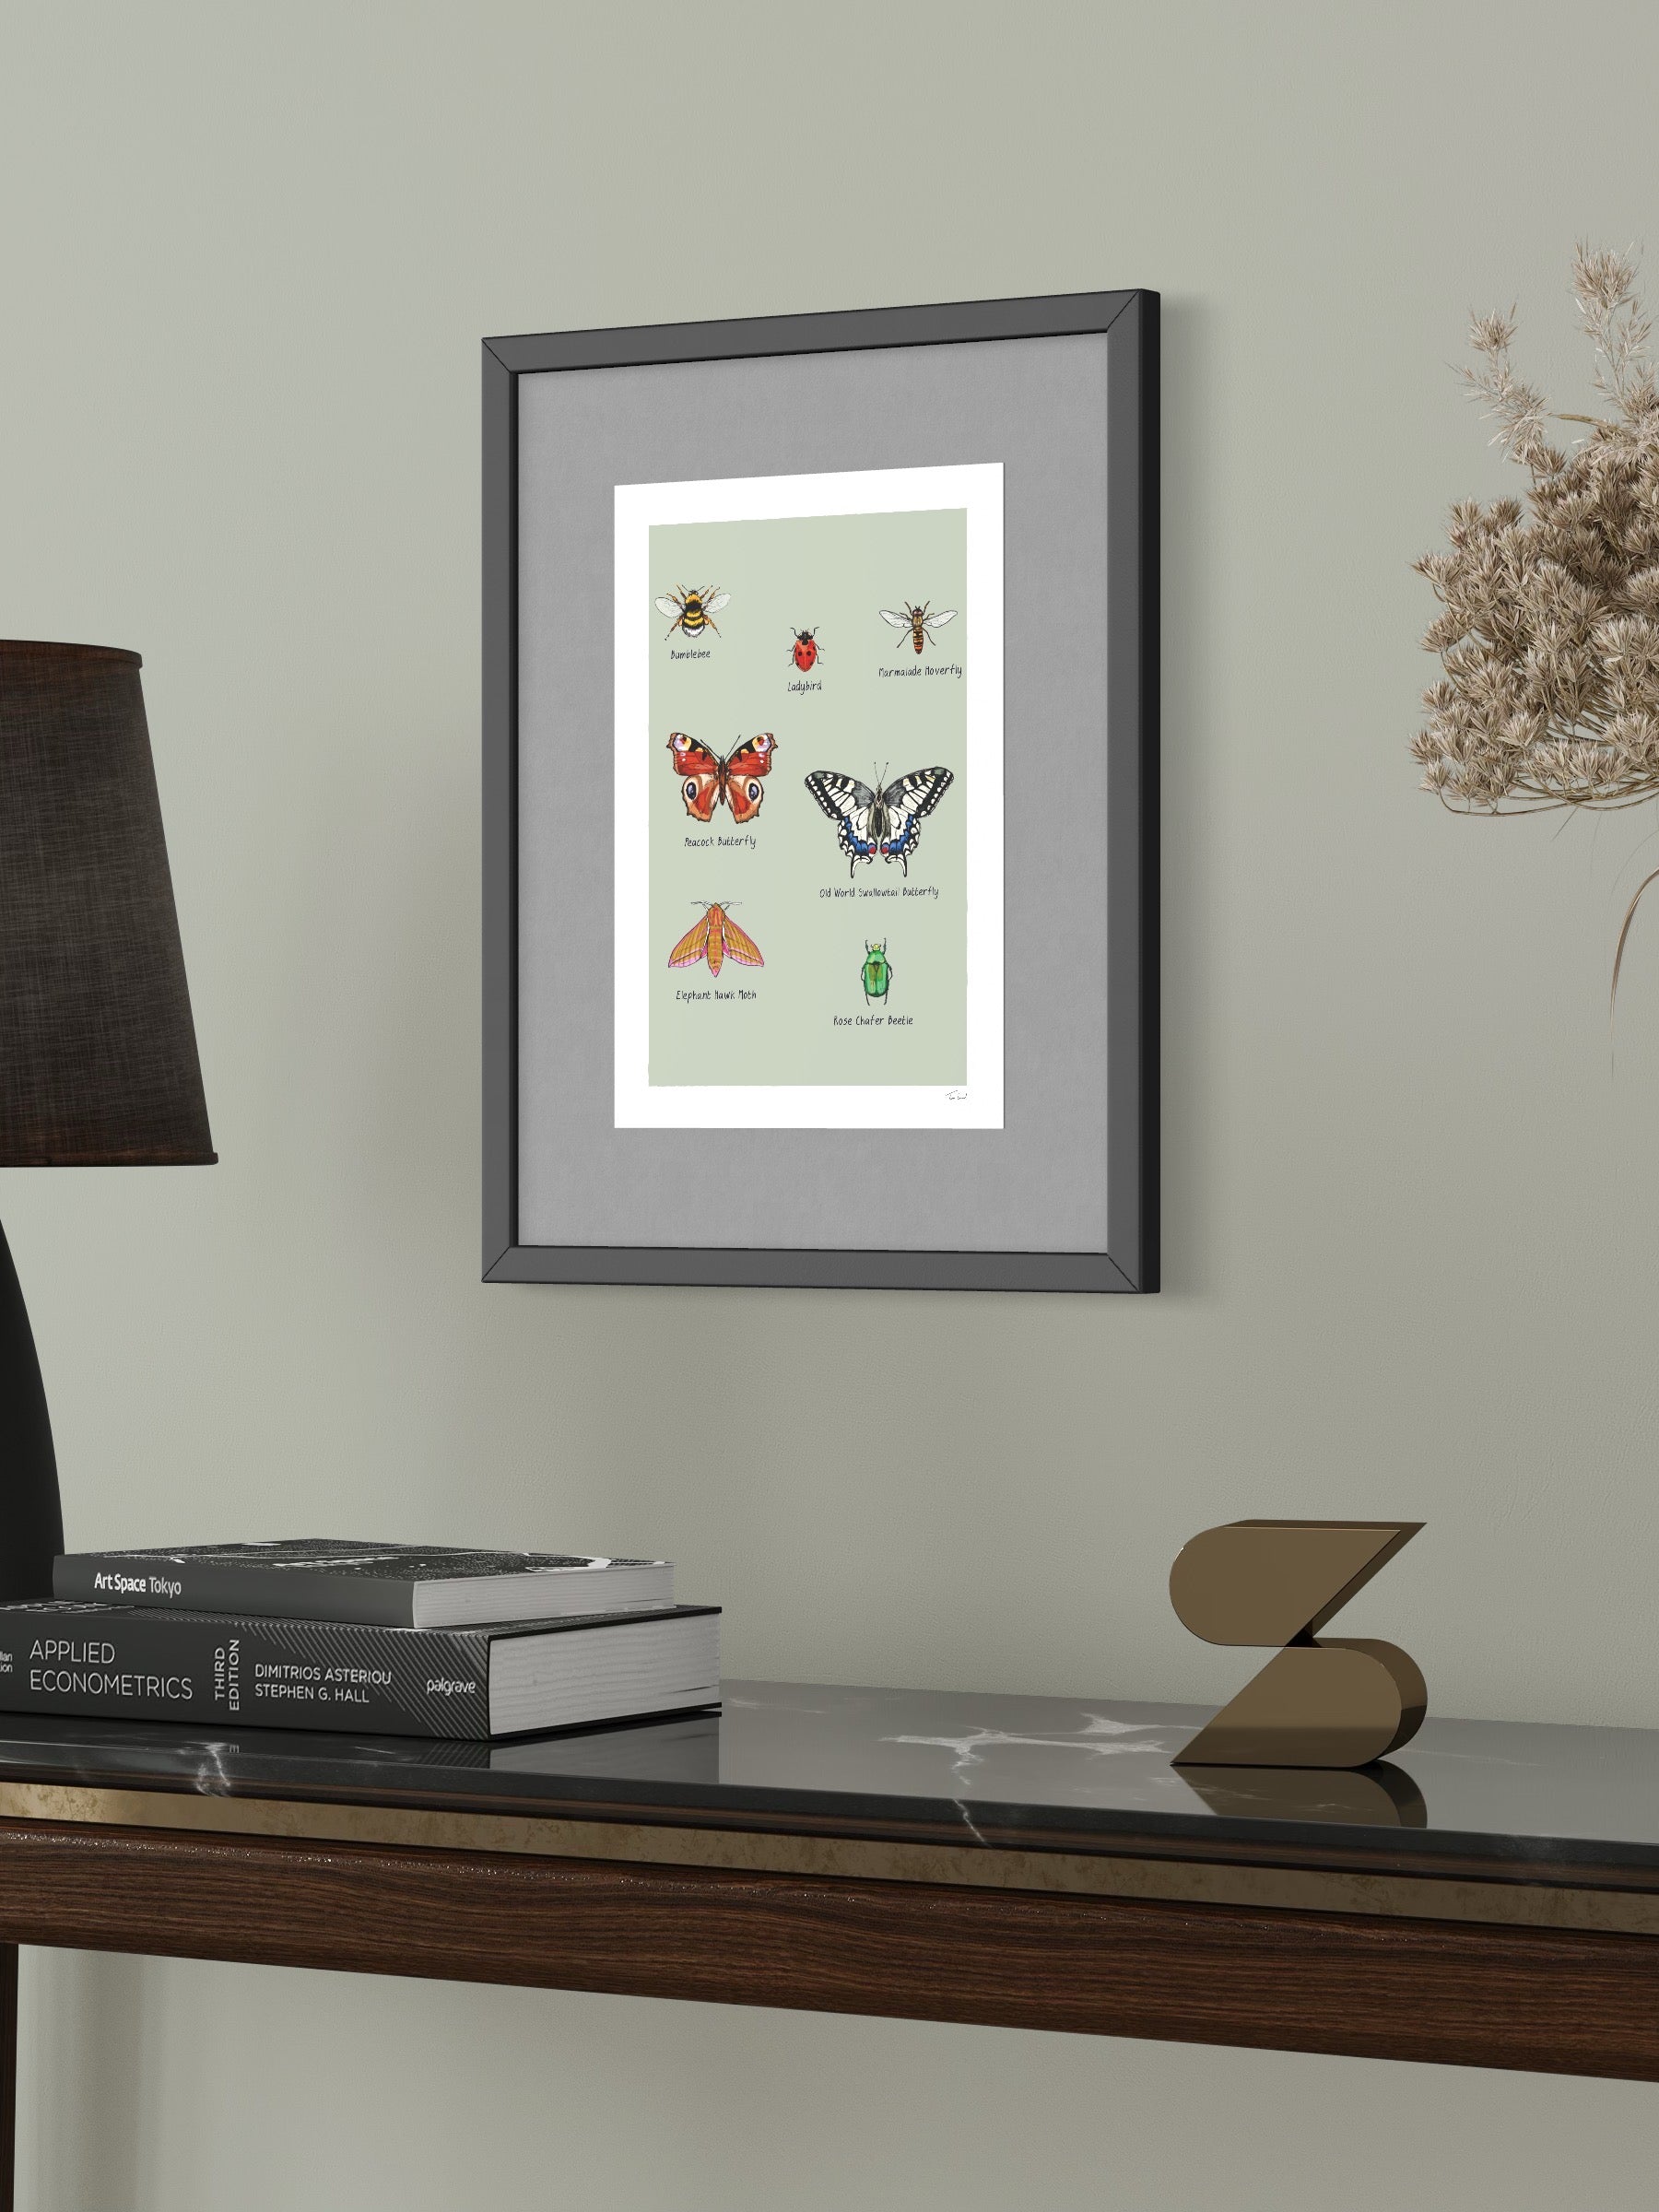 This image shows a giclee wall art print by Tom Laird Illustration of a Pollinating Insects of Great Britain, framed in a beautiful living room with tasteful modern home decor. This art print is available from Tom Laird Illustration in various sizes.